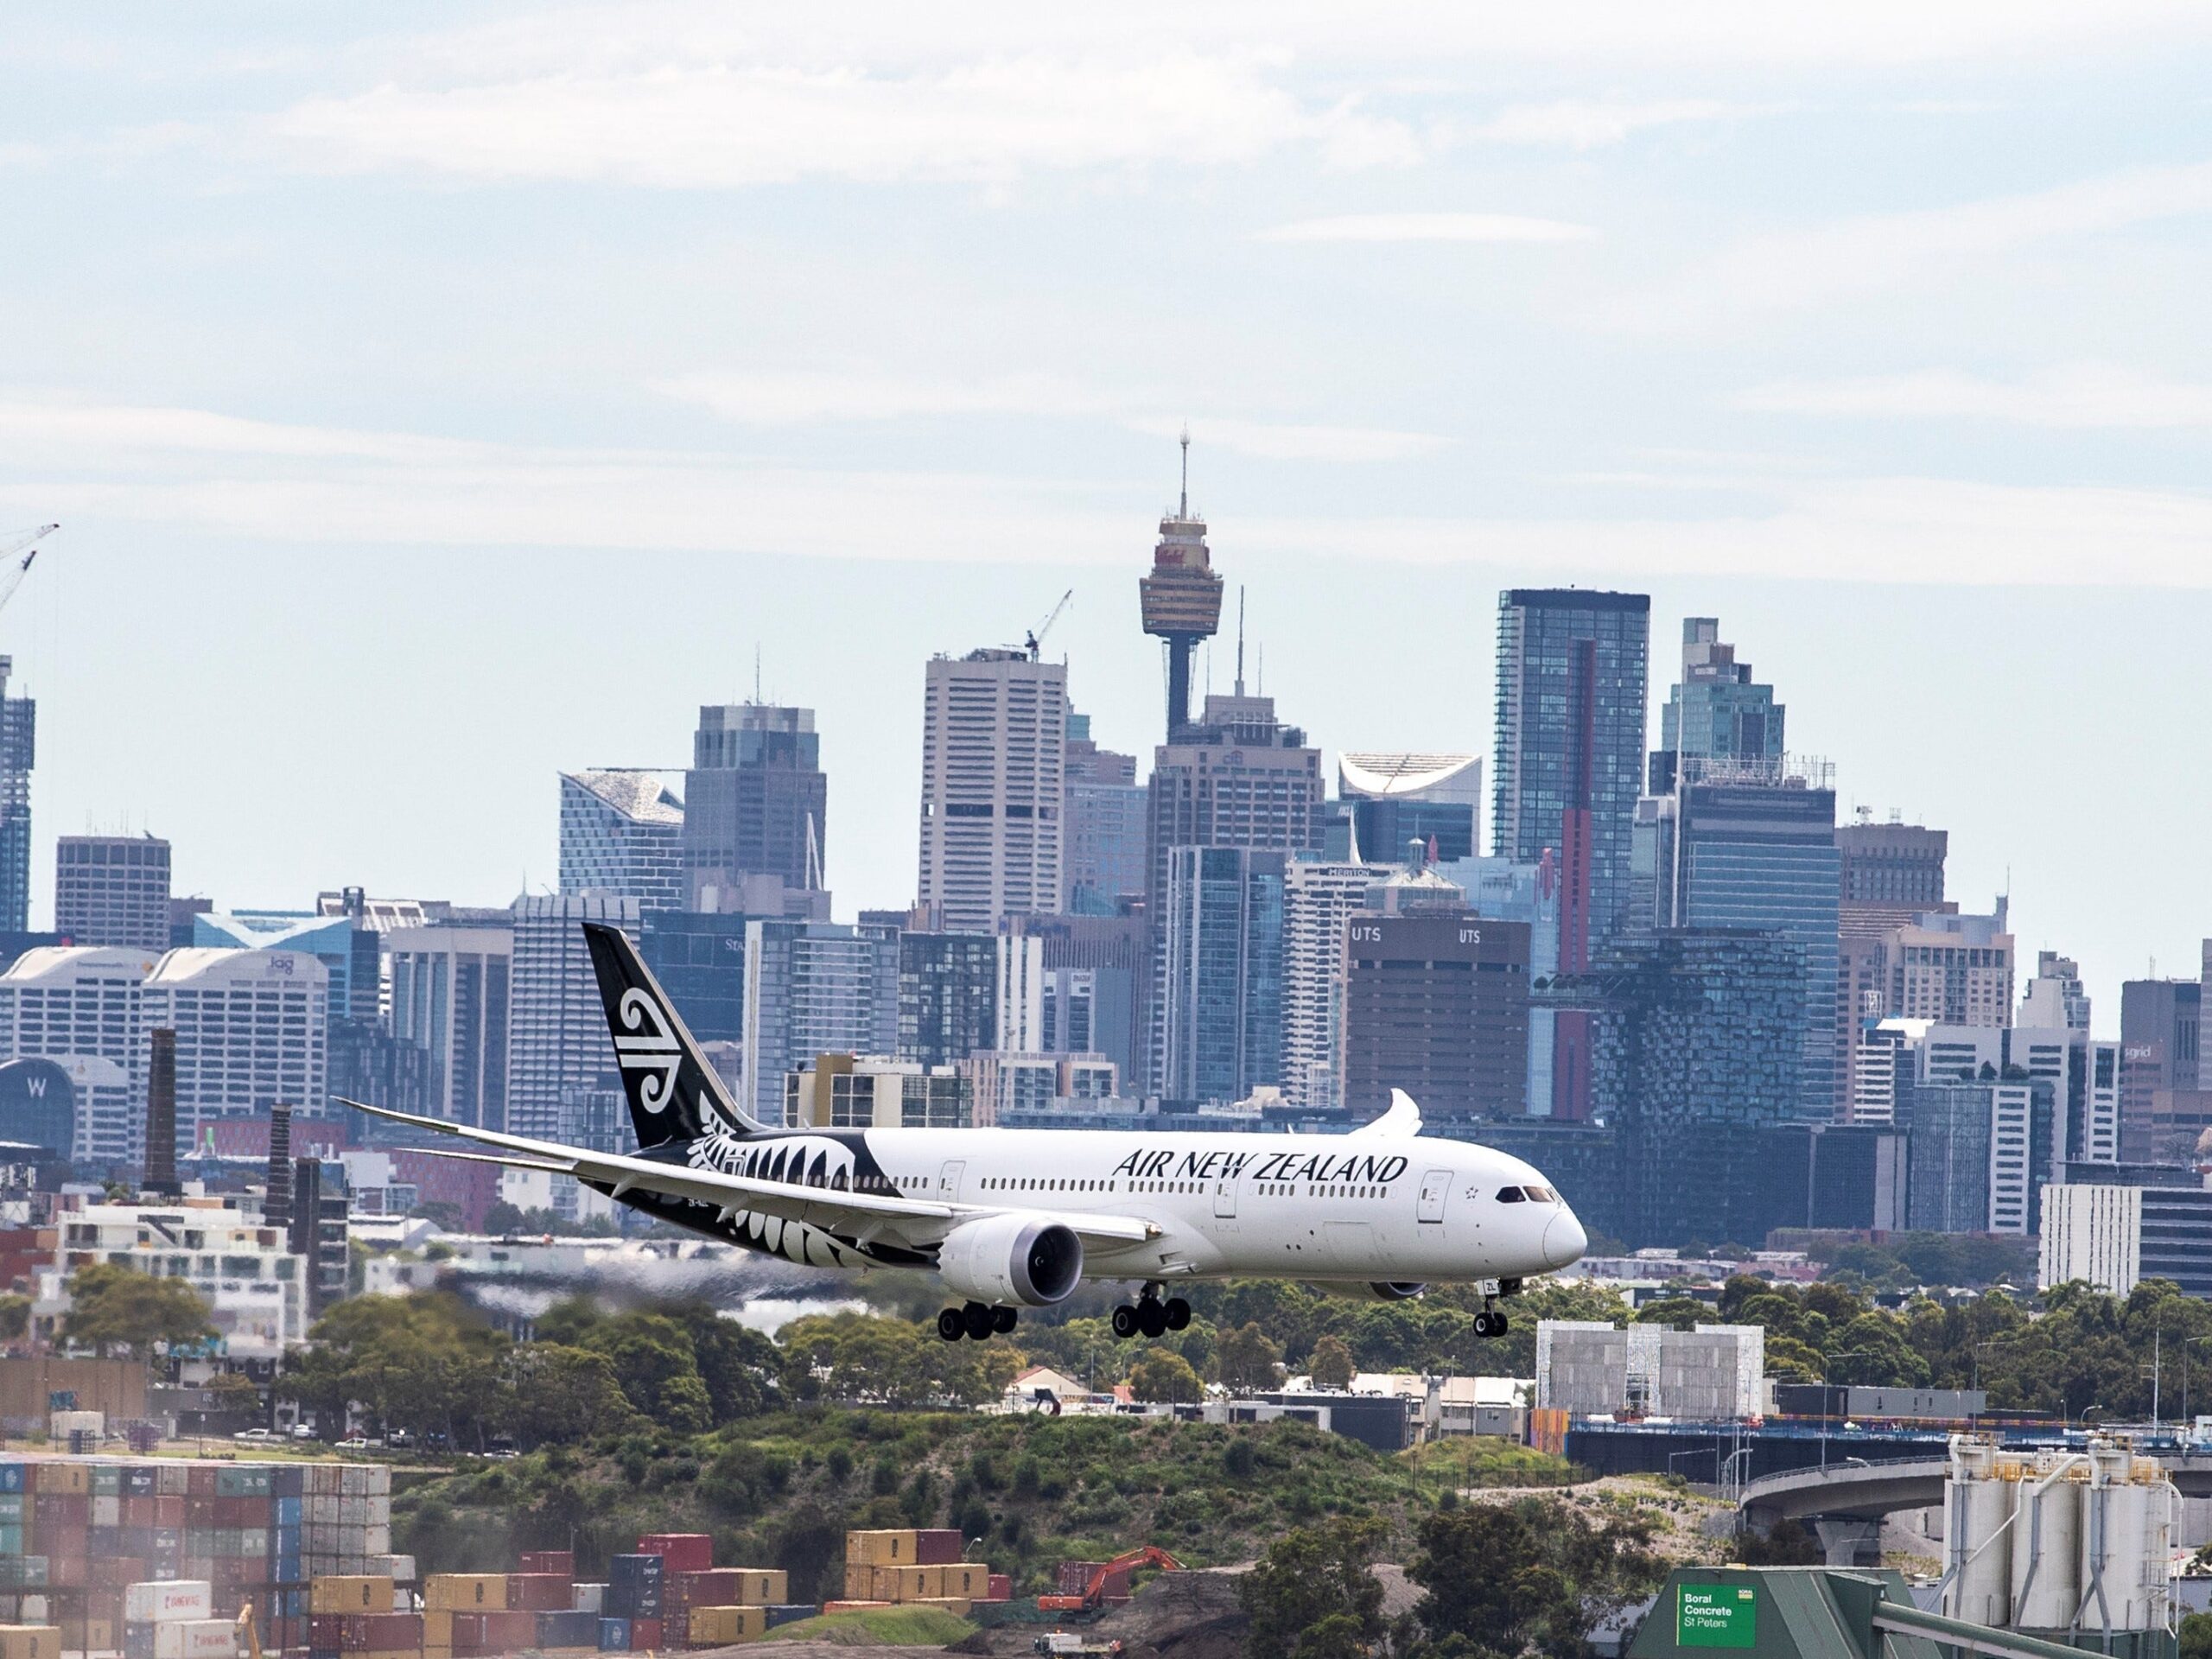 An Air New Zealand plane flies in front of the Sydney skyline